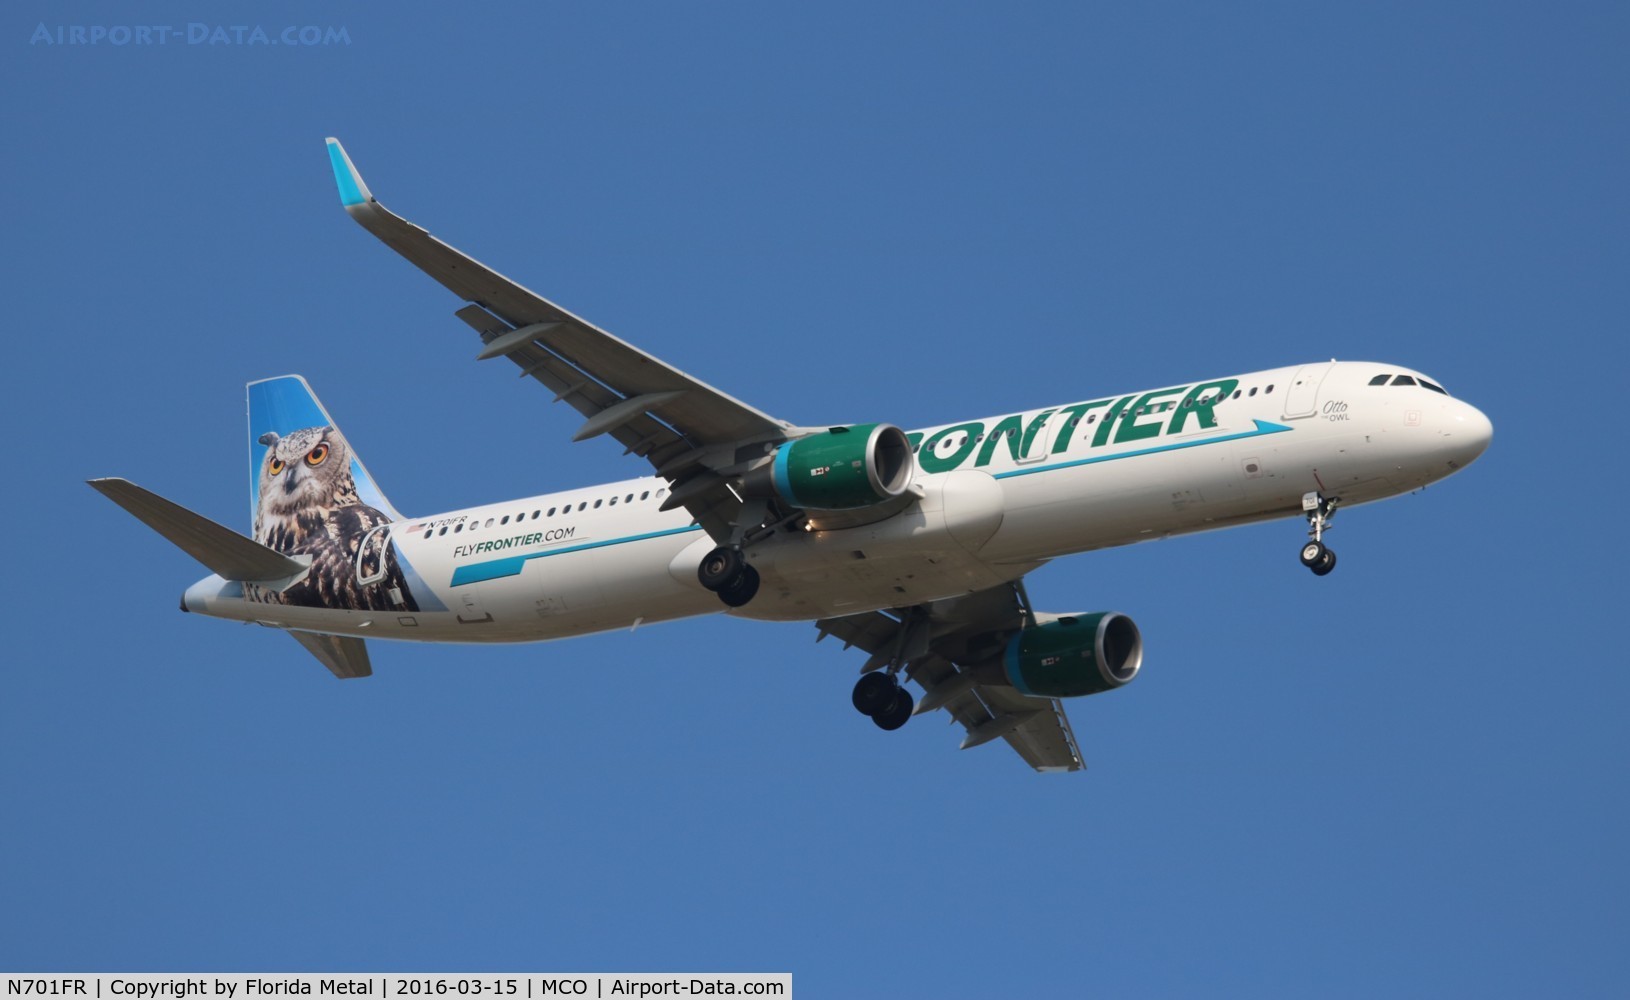 N701FR, 2015 Airbus A321-211 C/N 6793, Frontier Otto The Owl